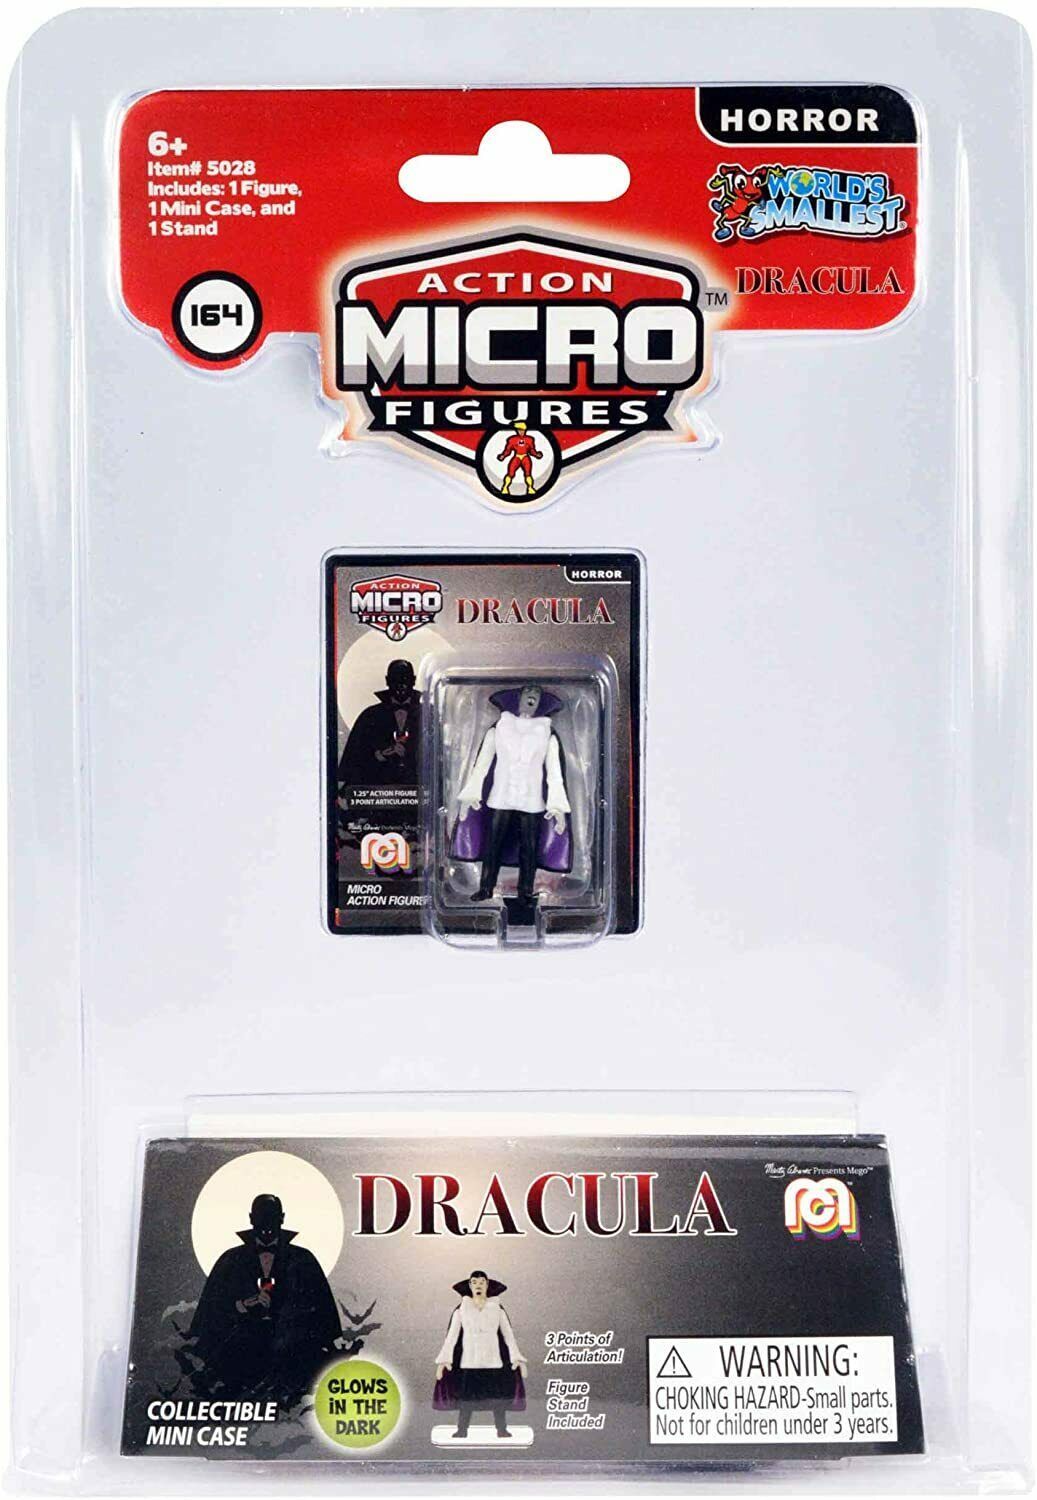 Primary image for World's Smallest Mego Horror Micro Action Figure: Dracula